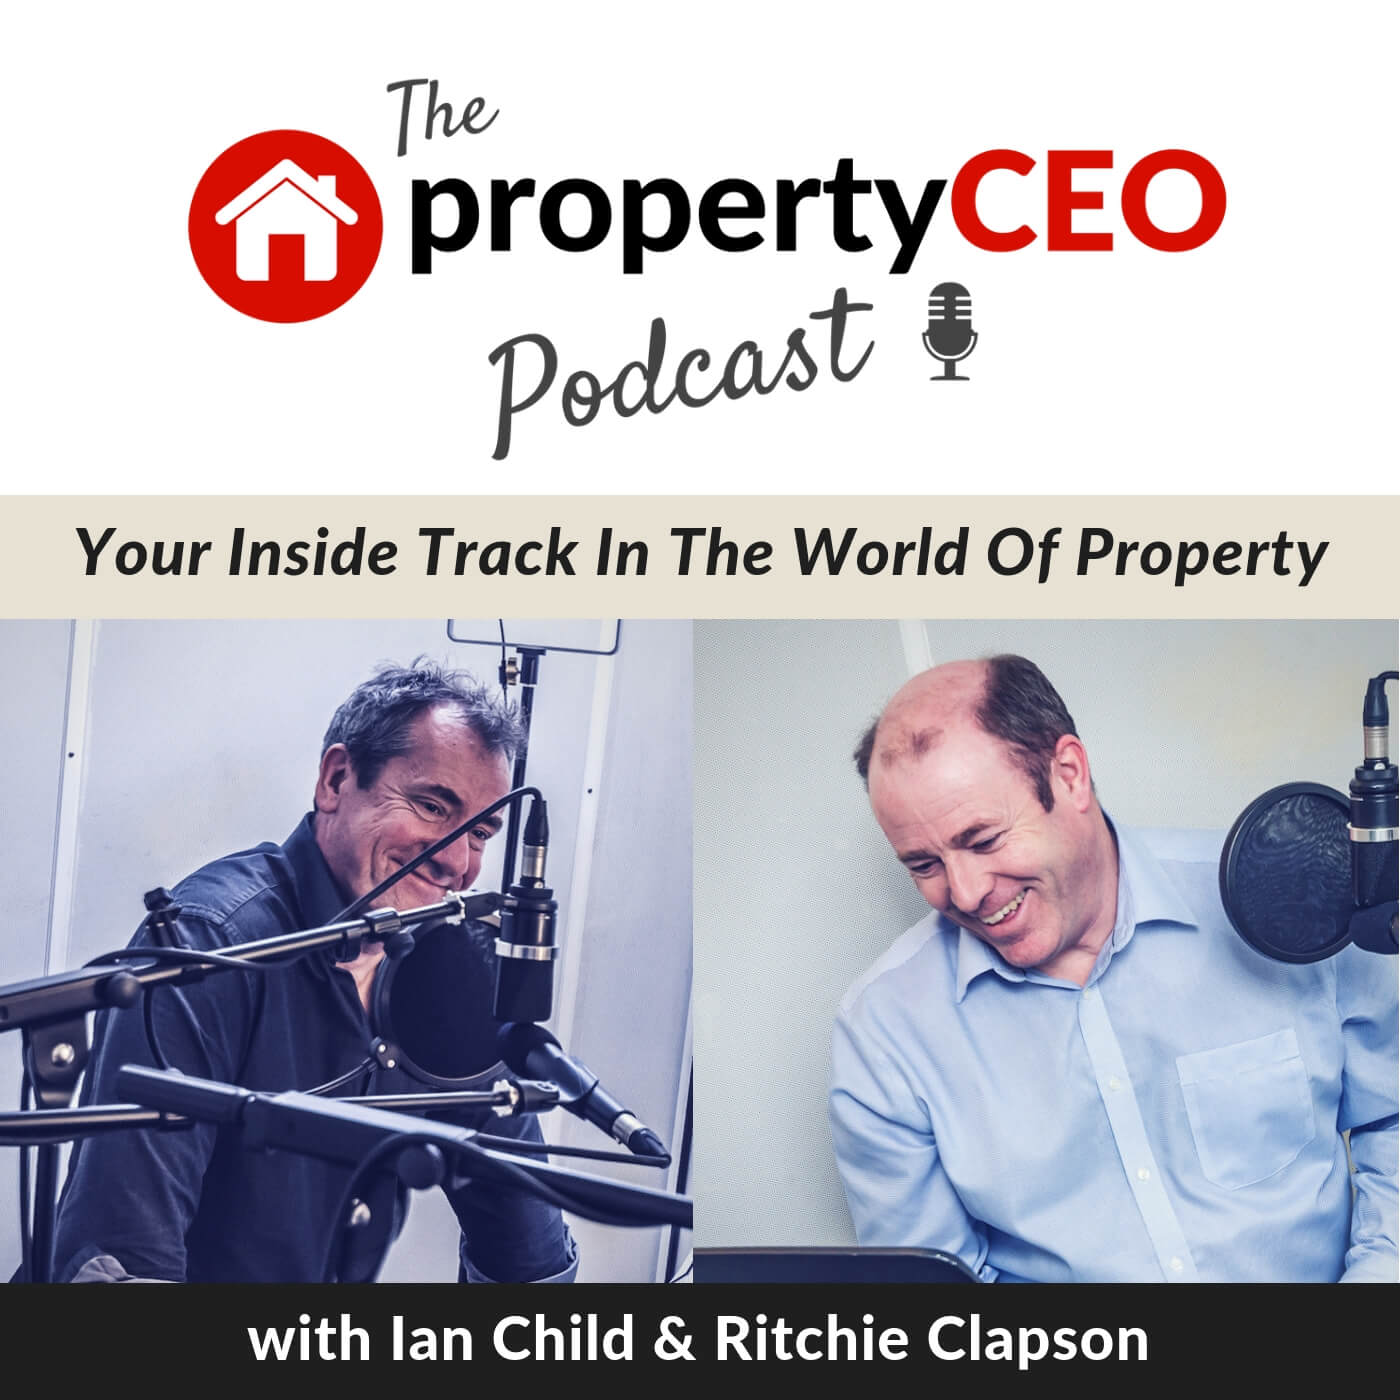 The propertyCEO Podcast